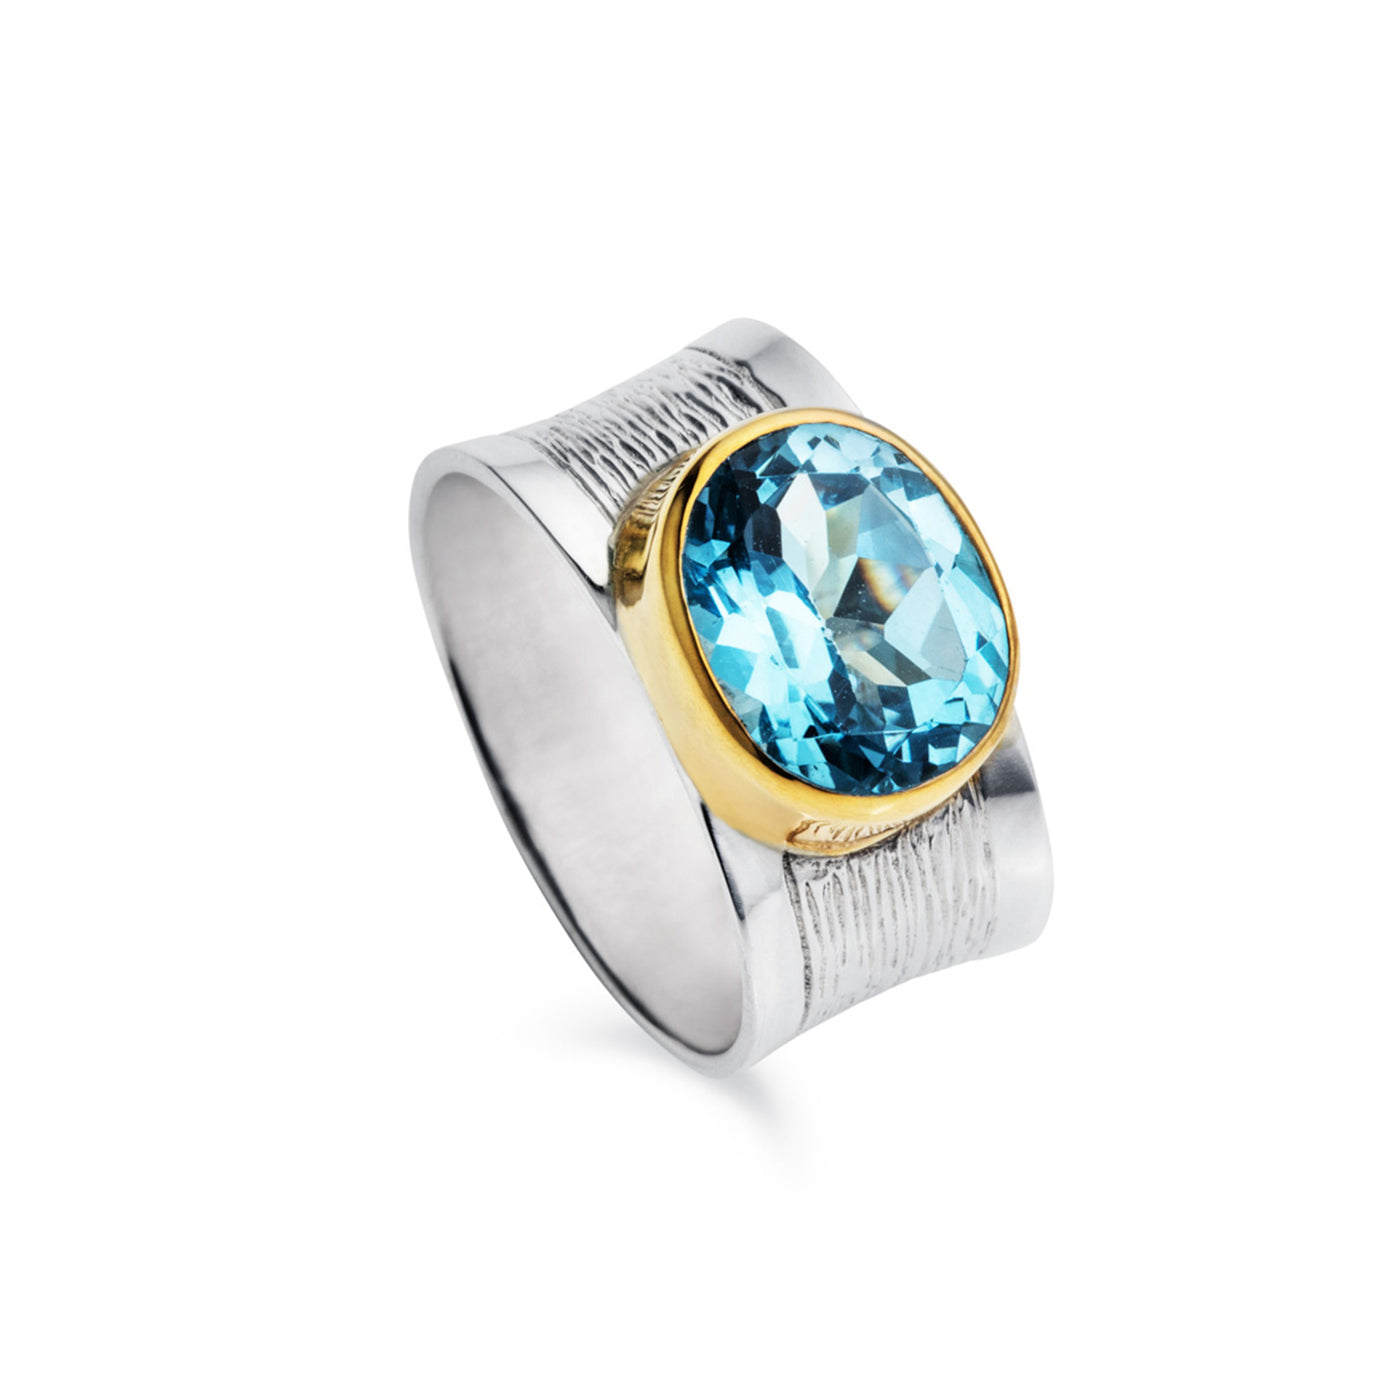 Photo of Large Blue Topaz Ring in Sterling Silver and 18ct Gold Vermeil